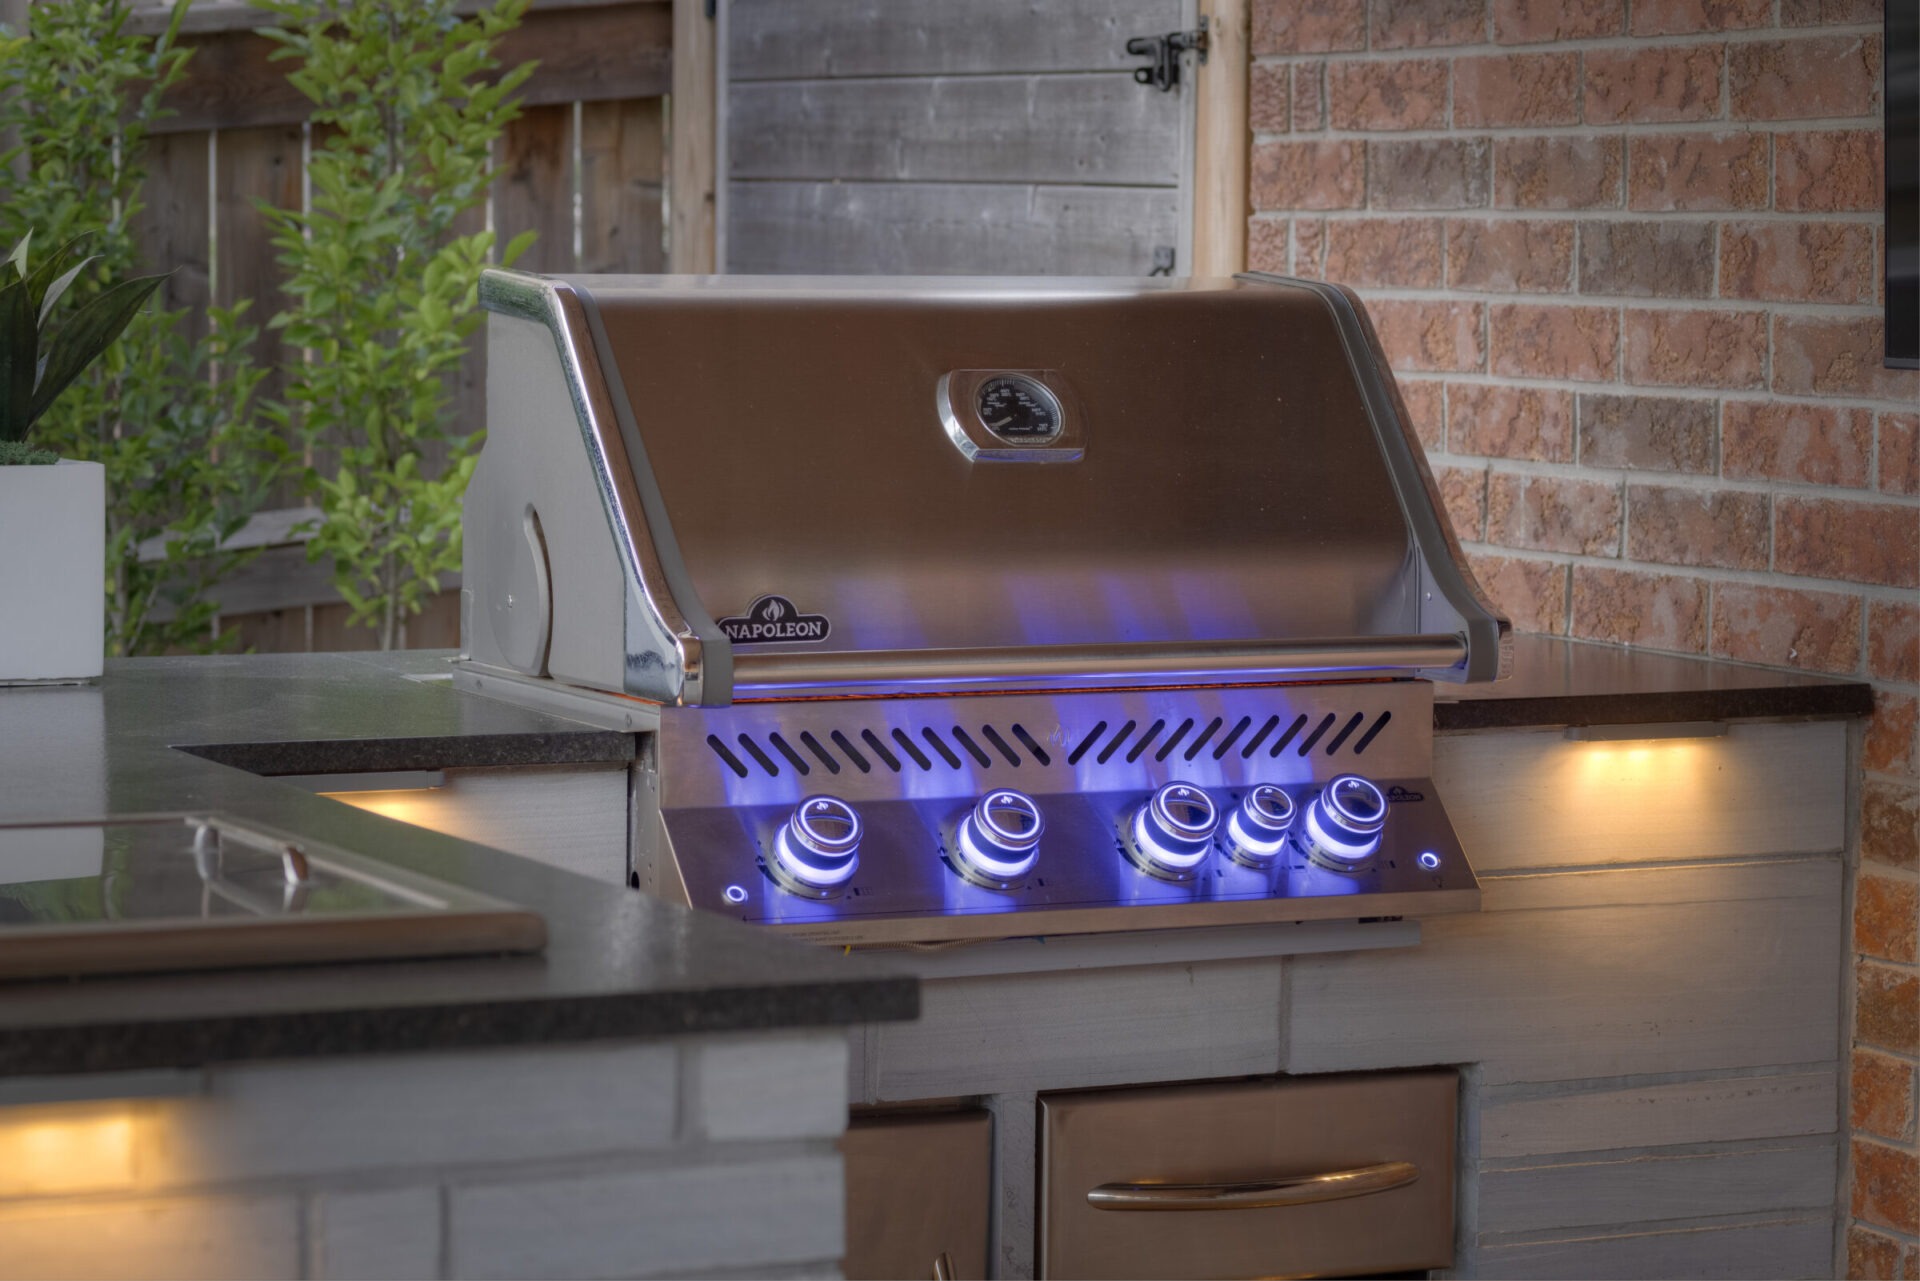 A modern outdoor grill with illuminated control knobs is set against a brick wall in an outdoor kitchen setting surrounded by greenery.